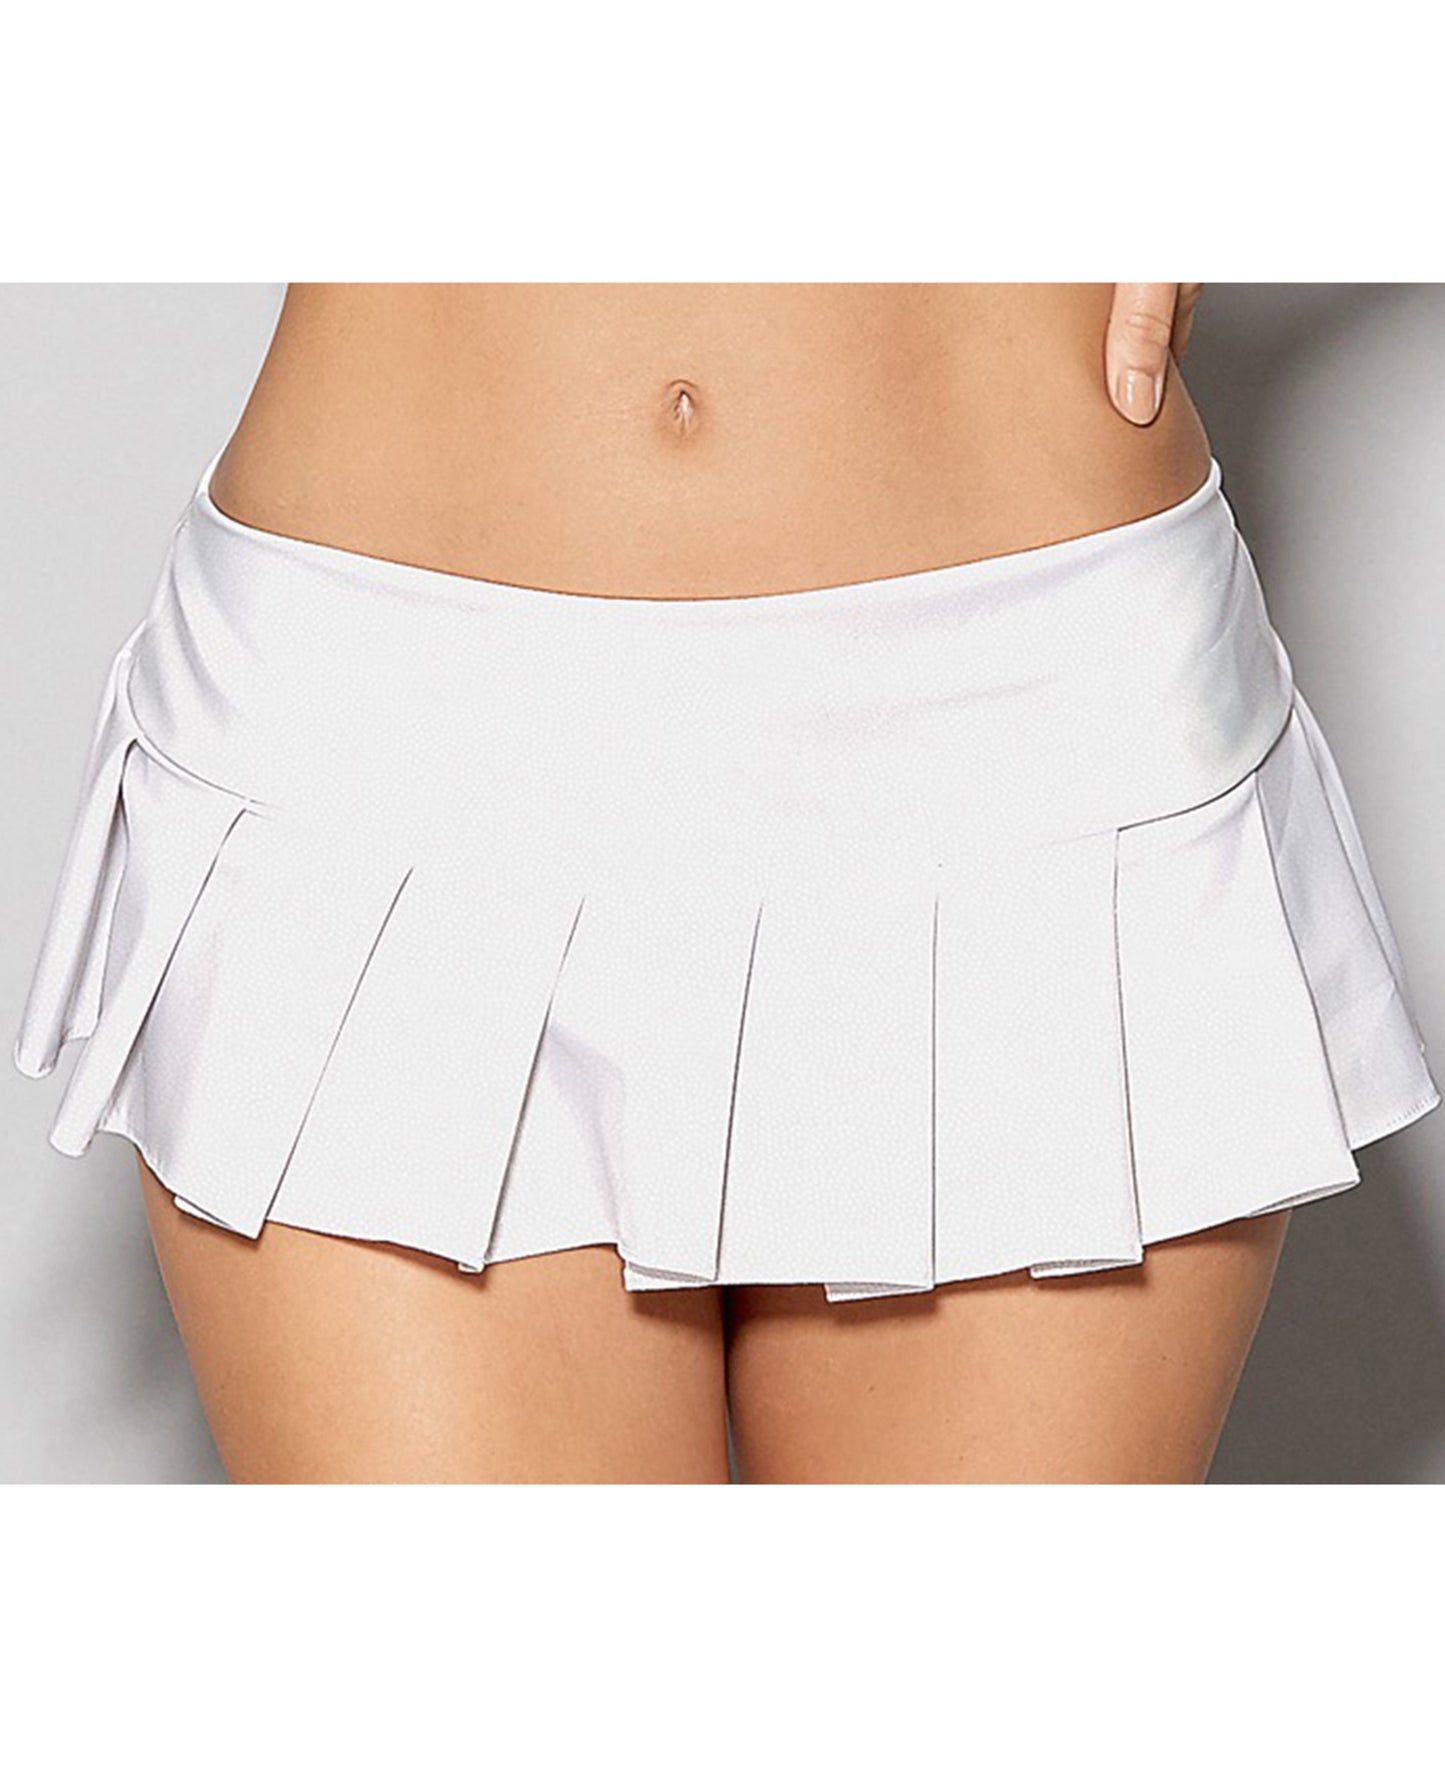 2092 Pleated Mini Skirt White front view